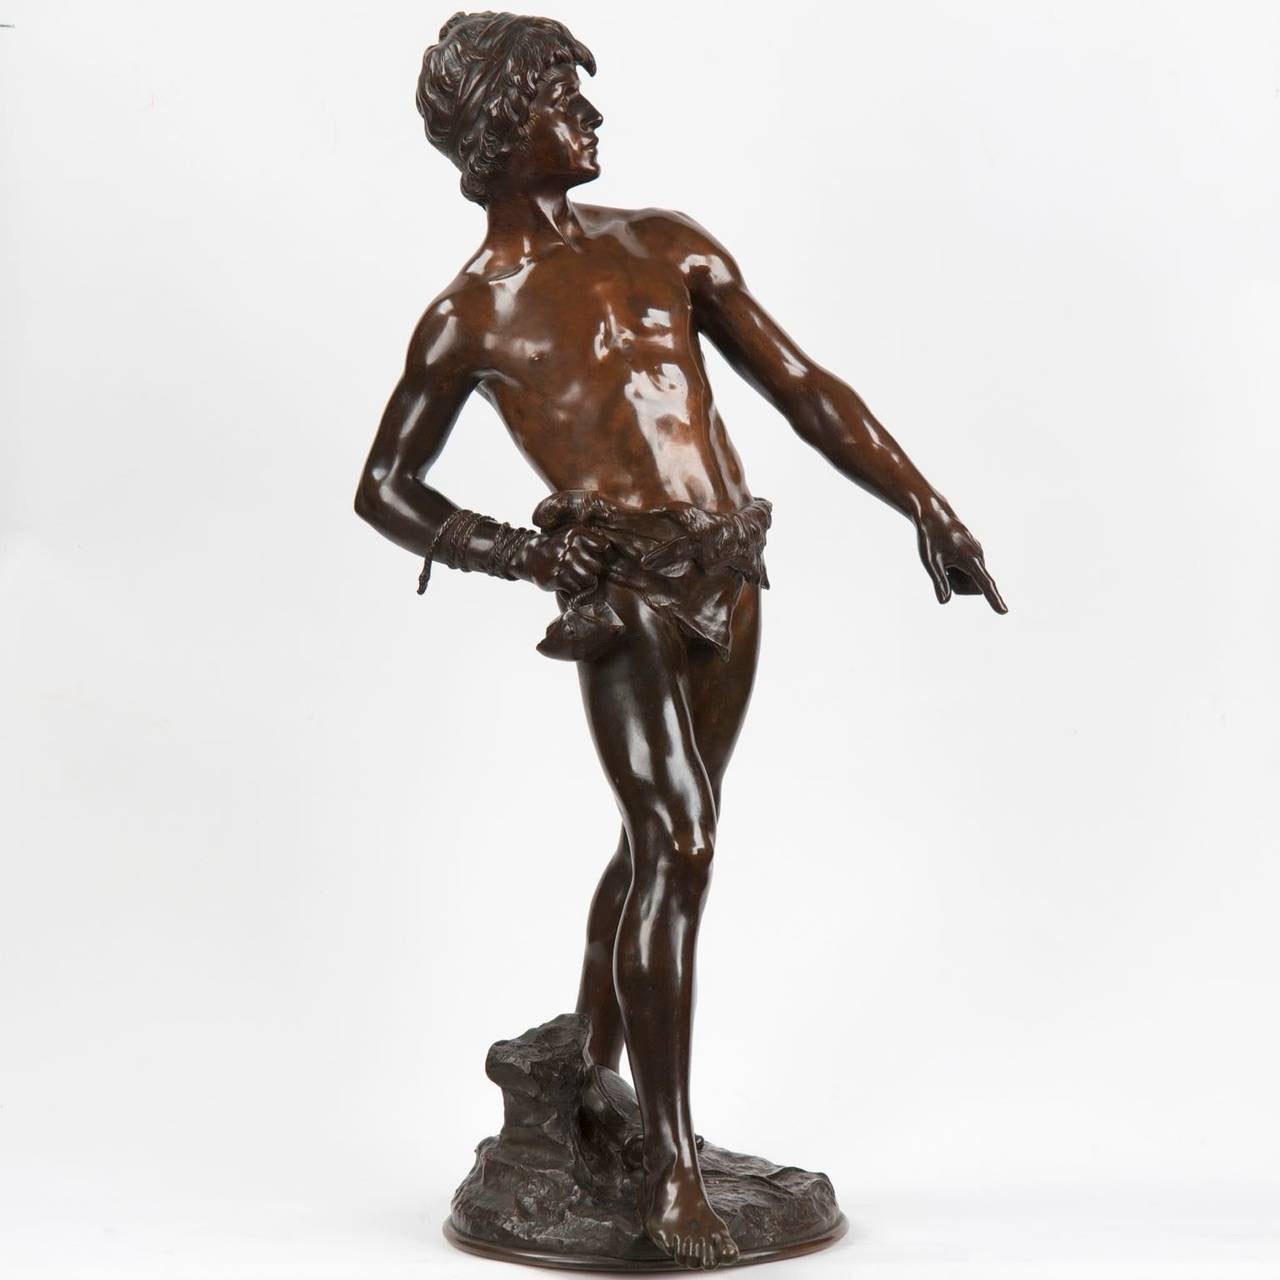 FRENCH BRONZE SCULPTURE OF DAVID BY LOUIS AUGUSTE MOREAU
Exhibited at Salon 1891, signed 